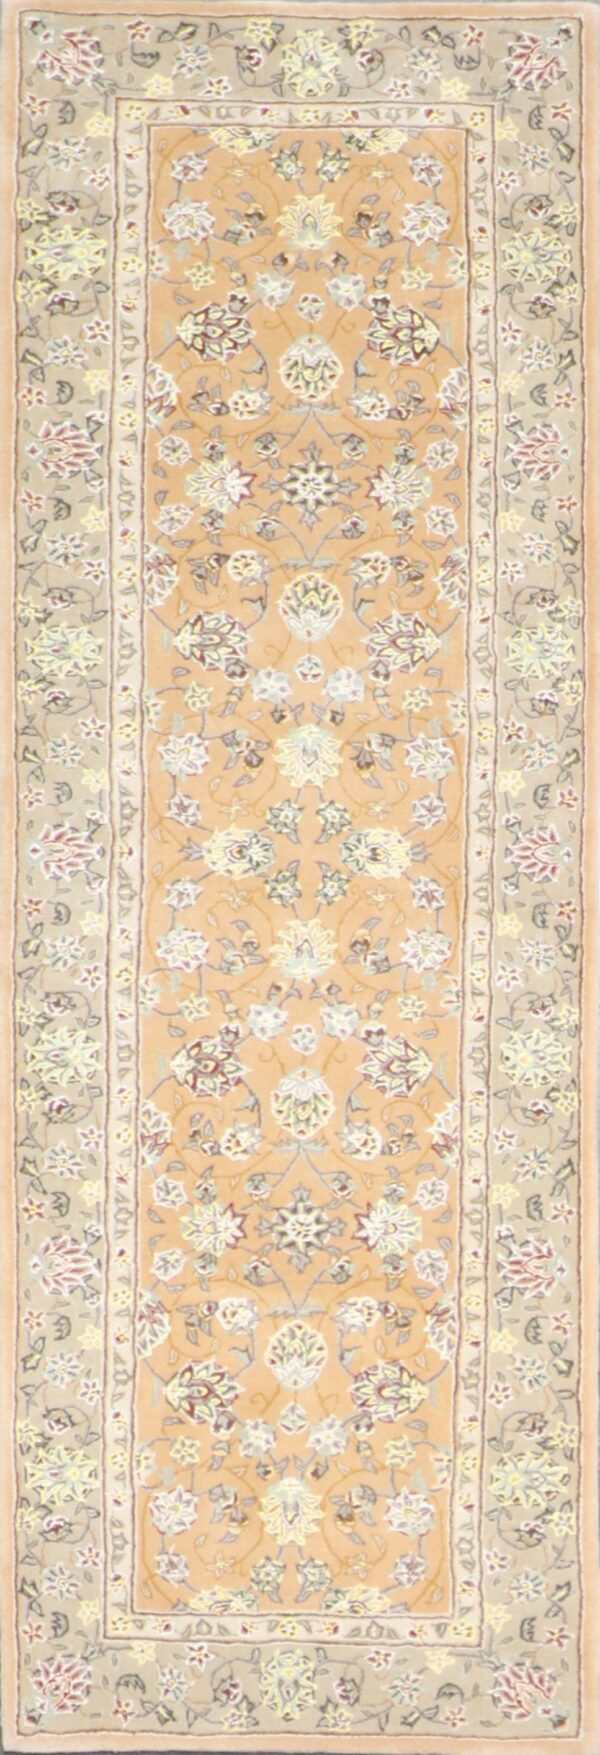 2'7"x8'1" Decorative Tan Wool & Silk Hand-Tufted Rug - Direct Rug Import | Rugs in Chicago, Indiana,South Bend,Granger